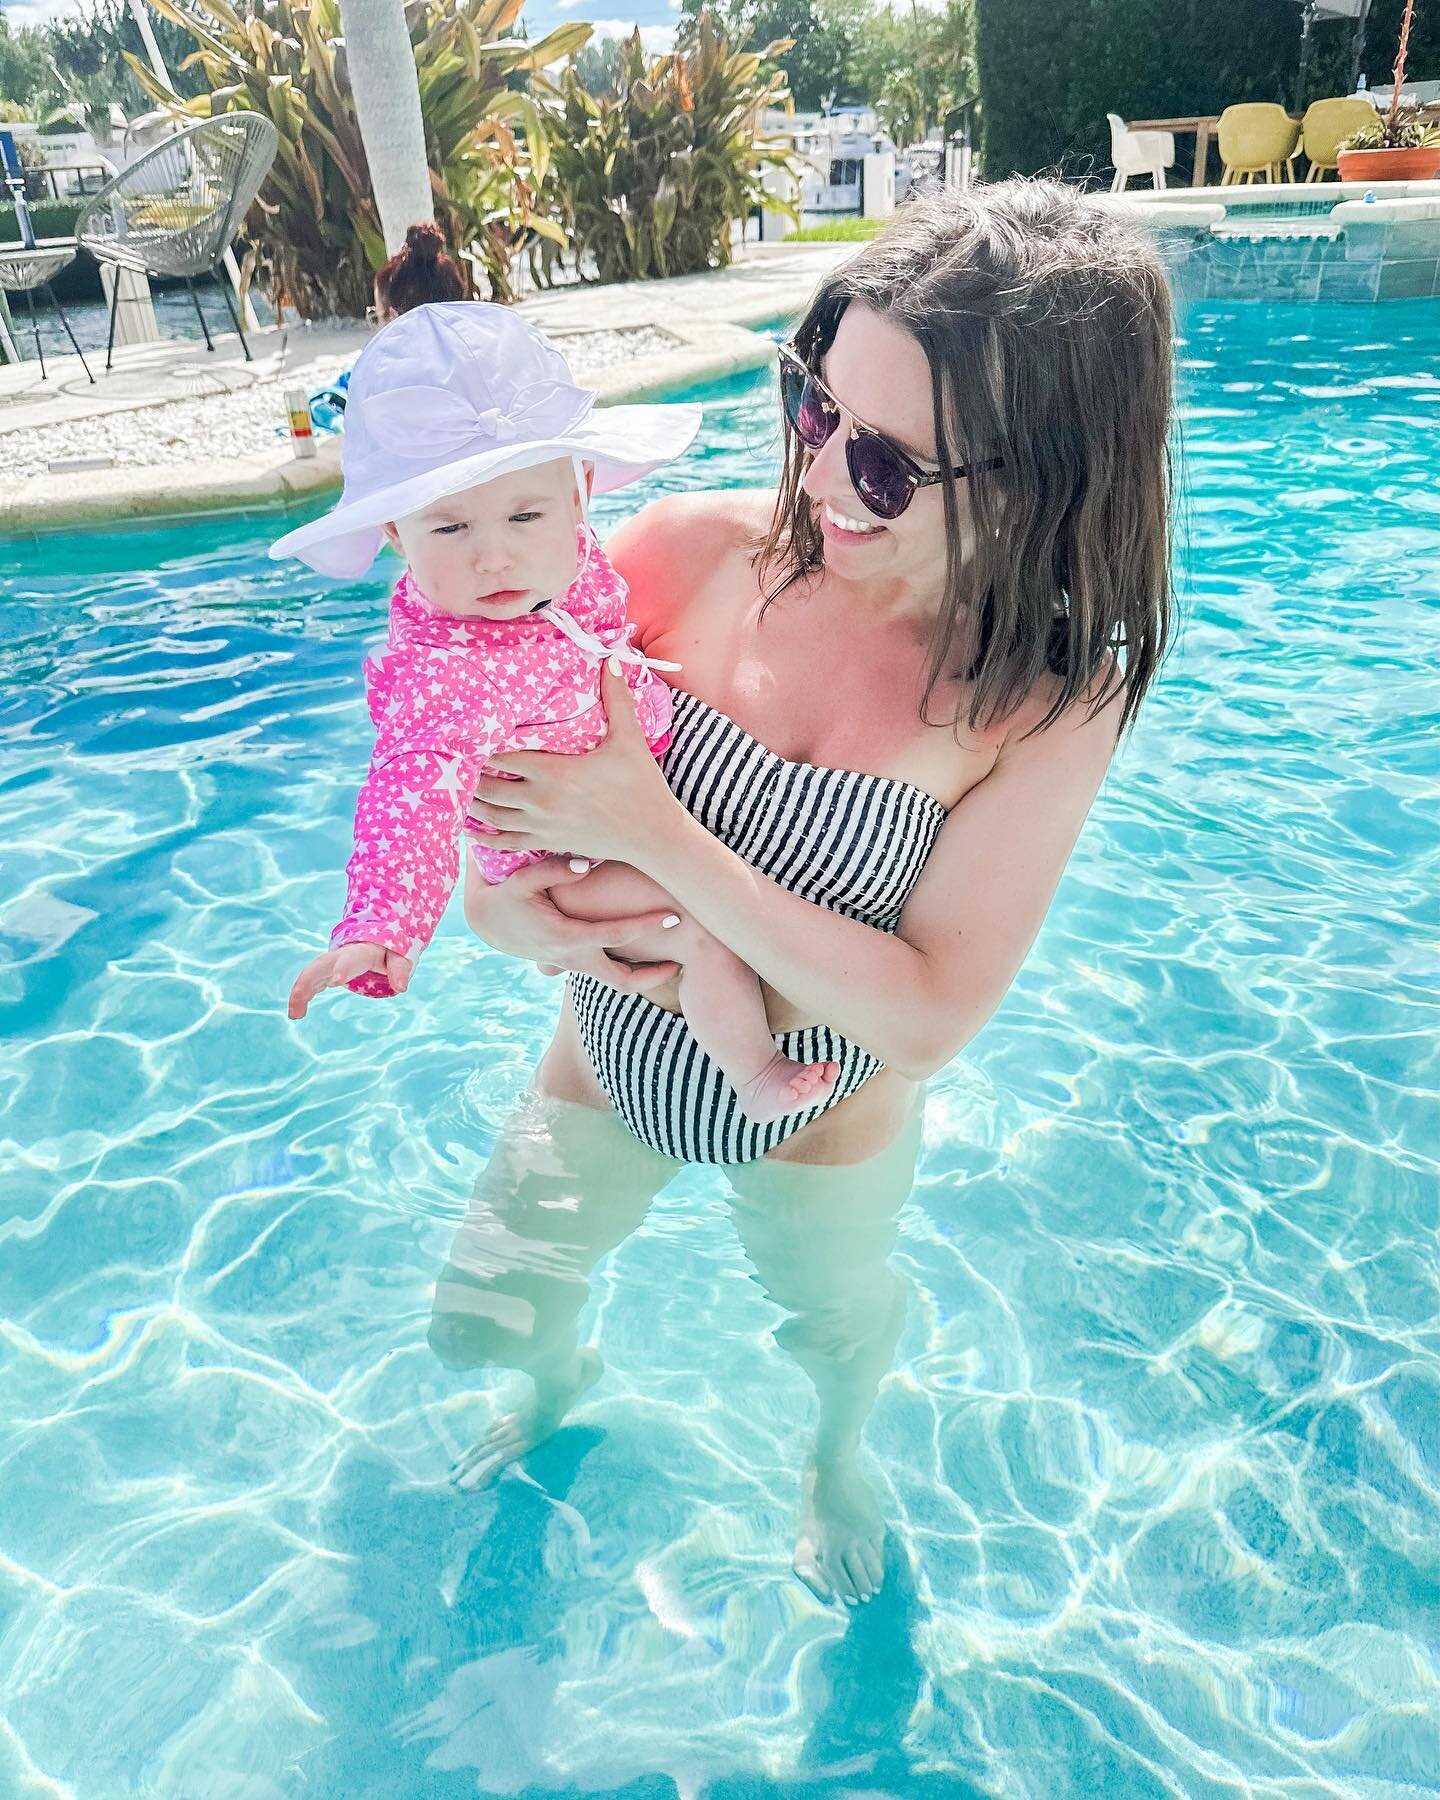 8 months 👧 + 16 weeks 👦 

Celebrating so many things this week + I feel like one lucky mama!

#vacation #babysfirstvacation #2under2club #momlife #momanddaughter #motherhoodunplugged #pregnancy #secondpregnancyjourney #poolday #florida